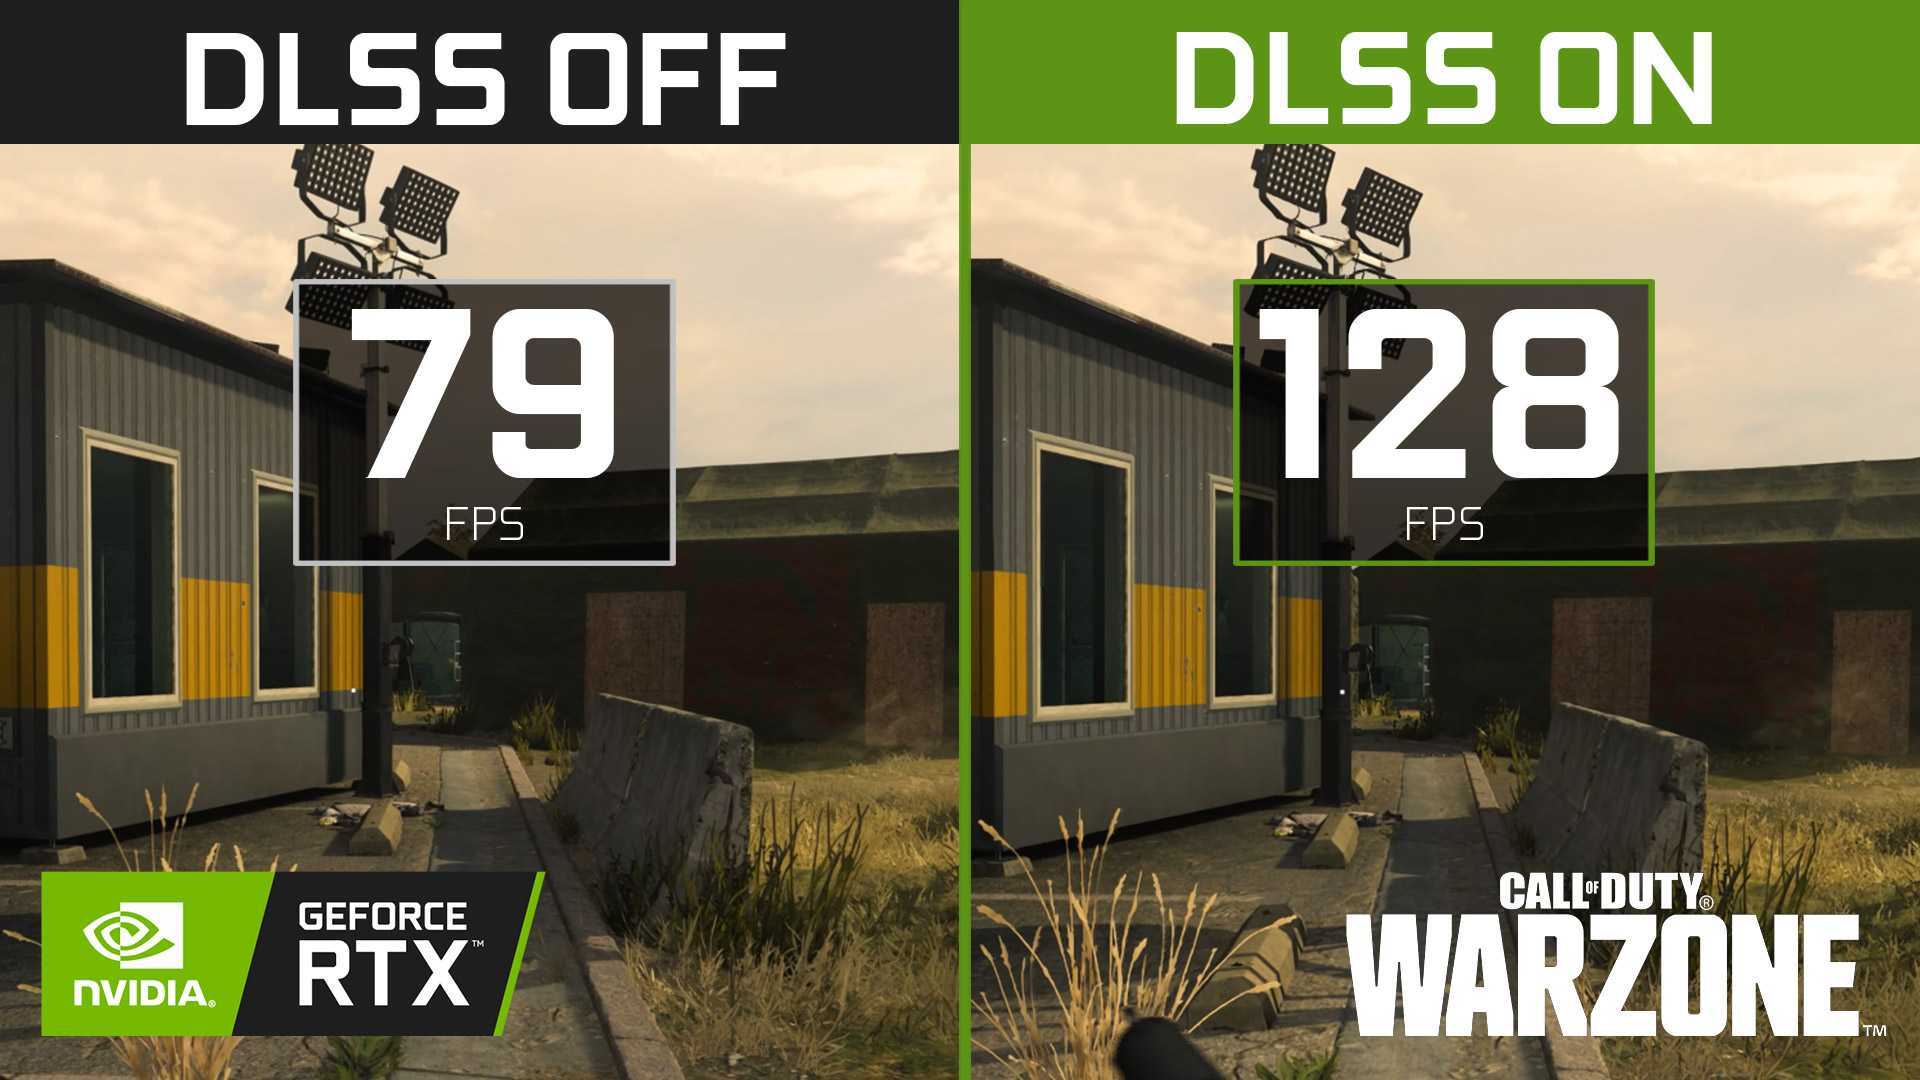 Nvidia DLSS is causing Call of Duty: Warzone Aiming related Issues